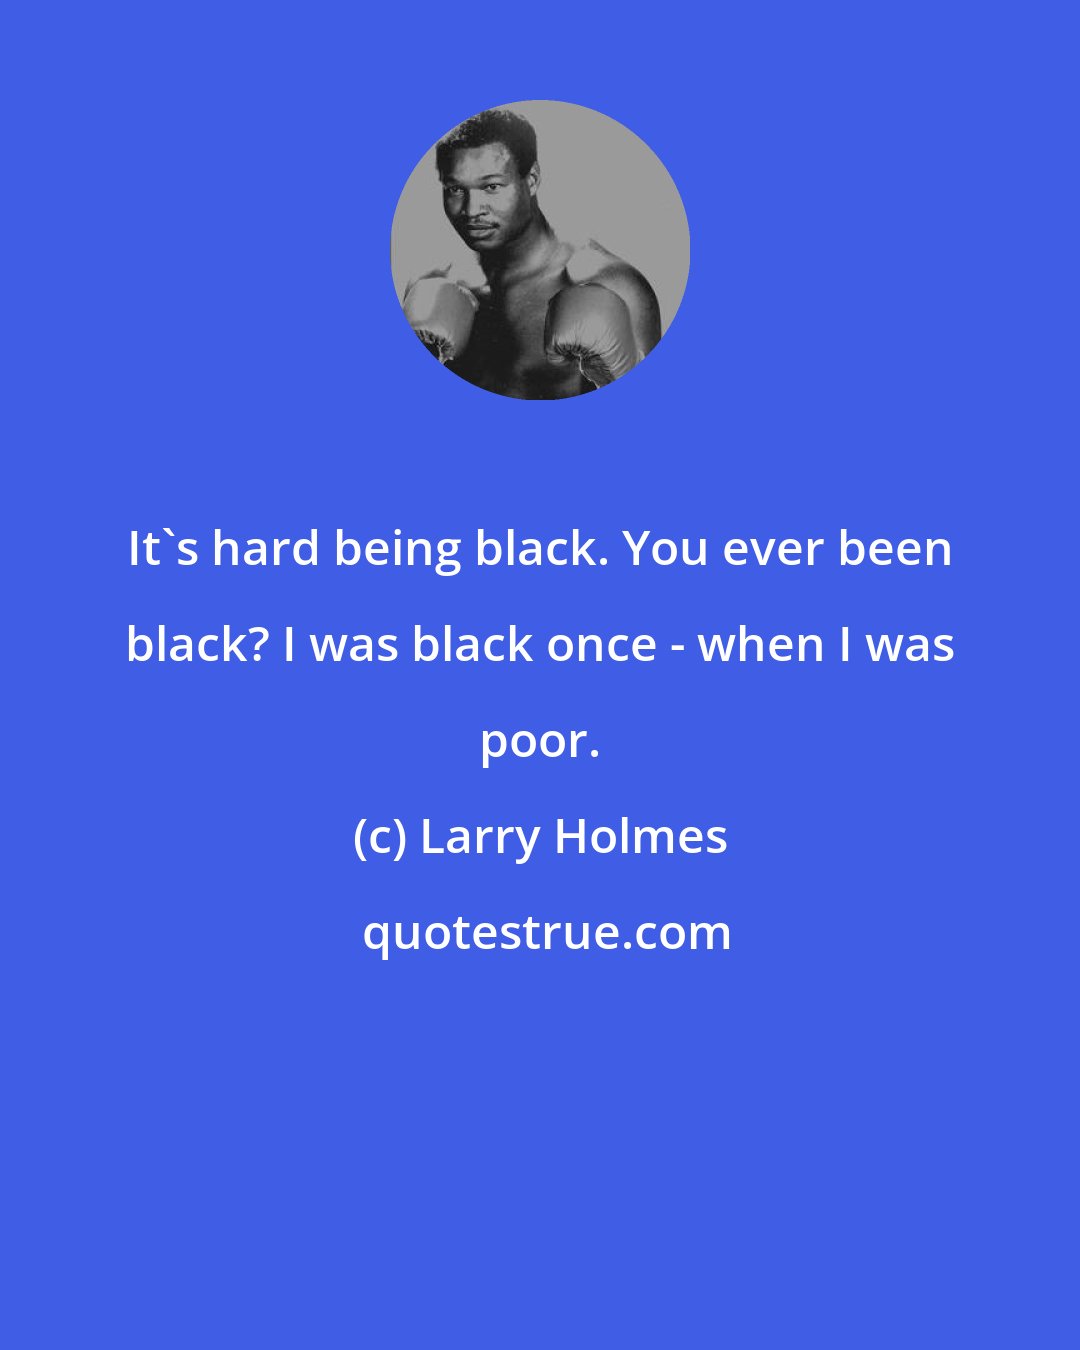 Larry Holmes: It's hard being black. You ever been black? I was black once - when I was poor.